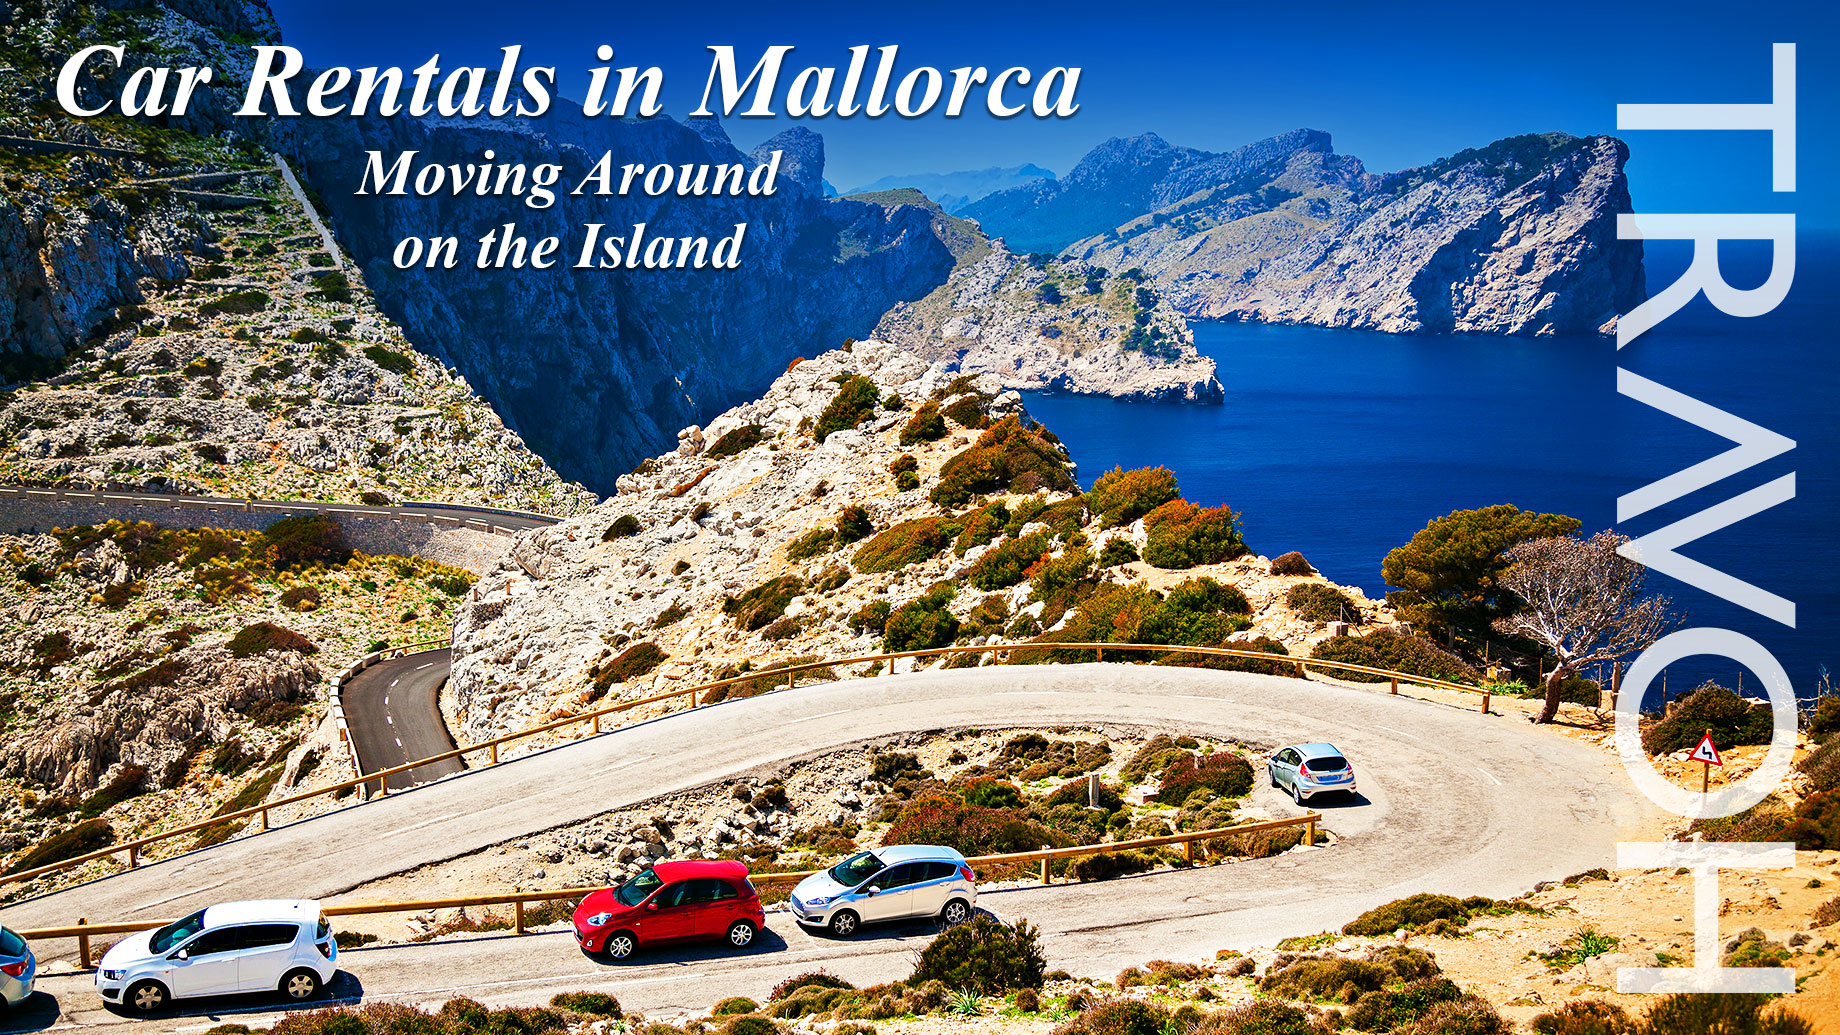 Car Rentals in Mallorca: Moving Around on the Island